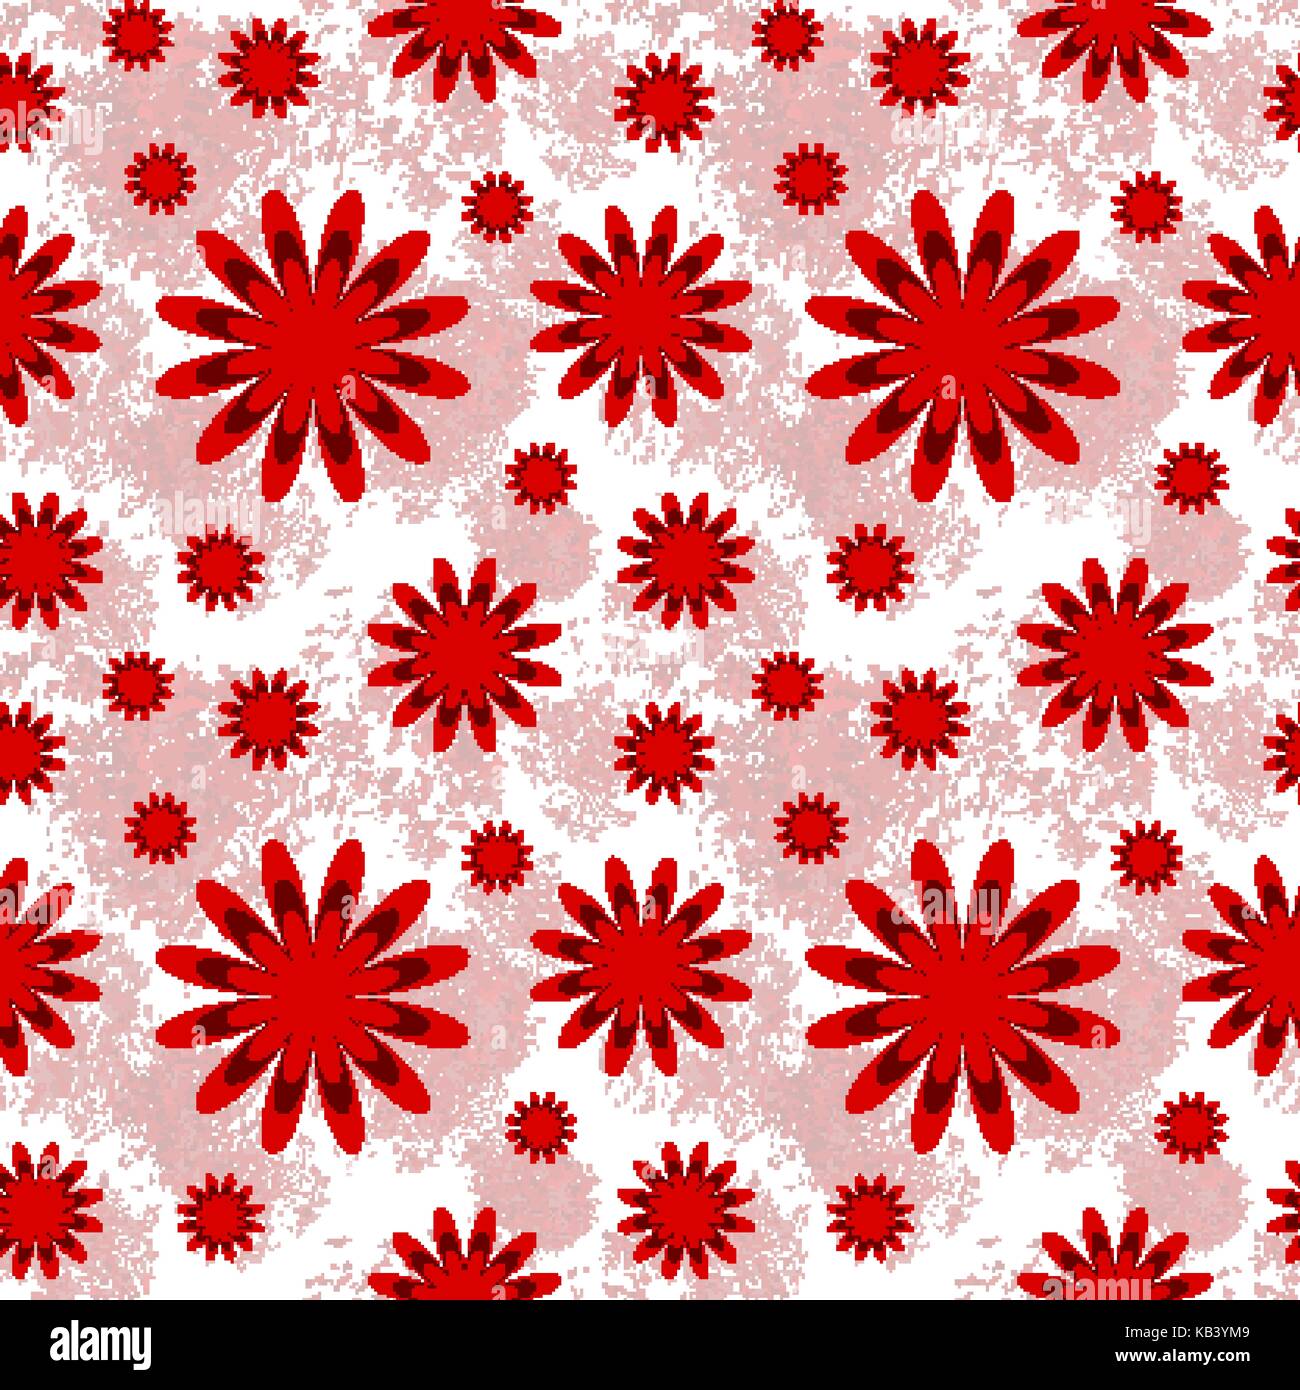 Beautiful floral seamless pattern in red and white Stock Vector